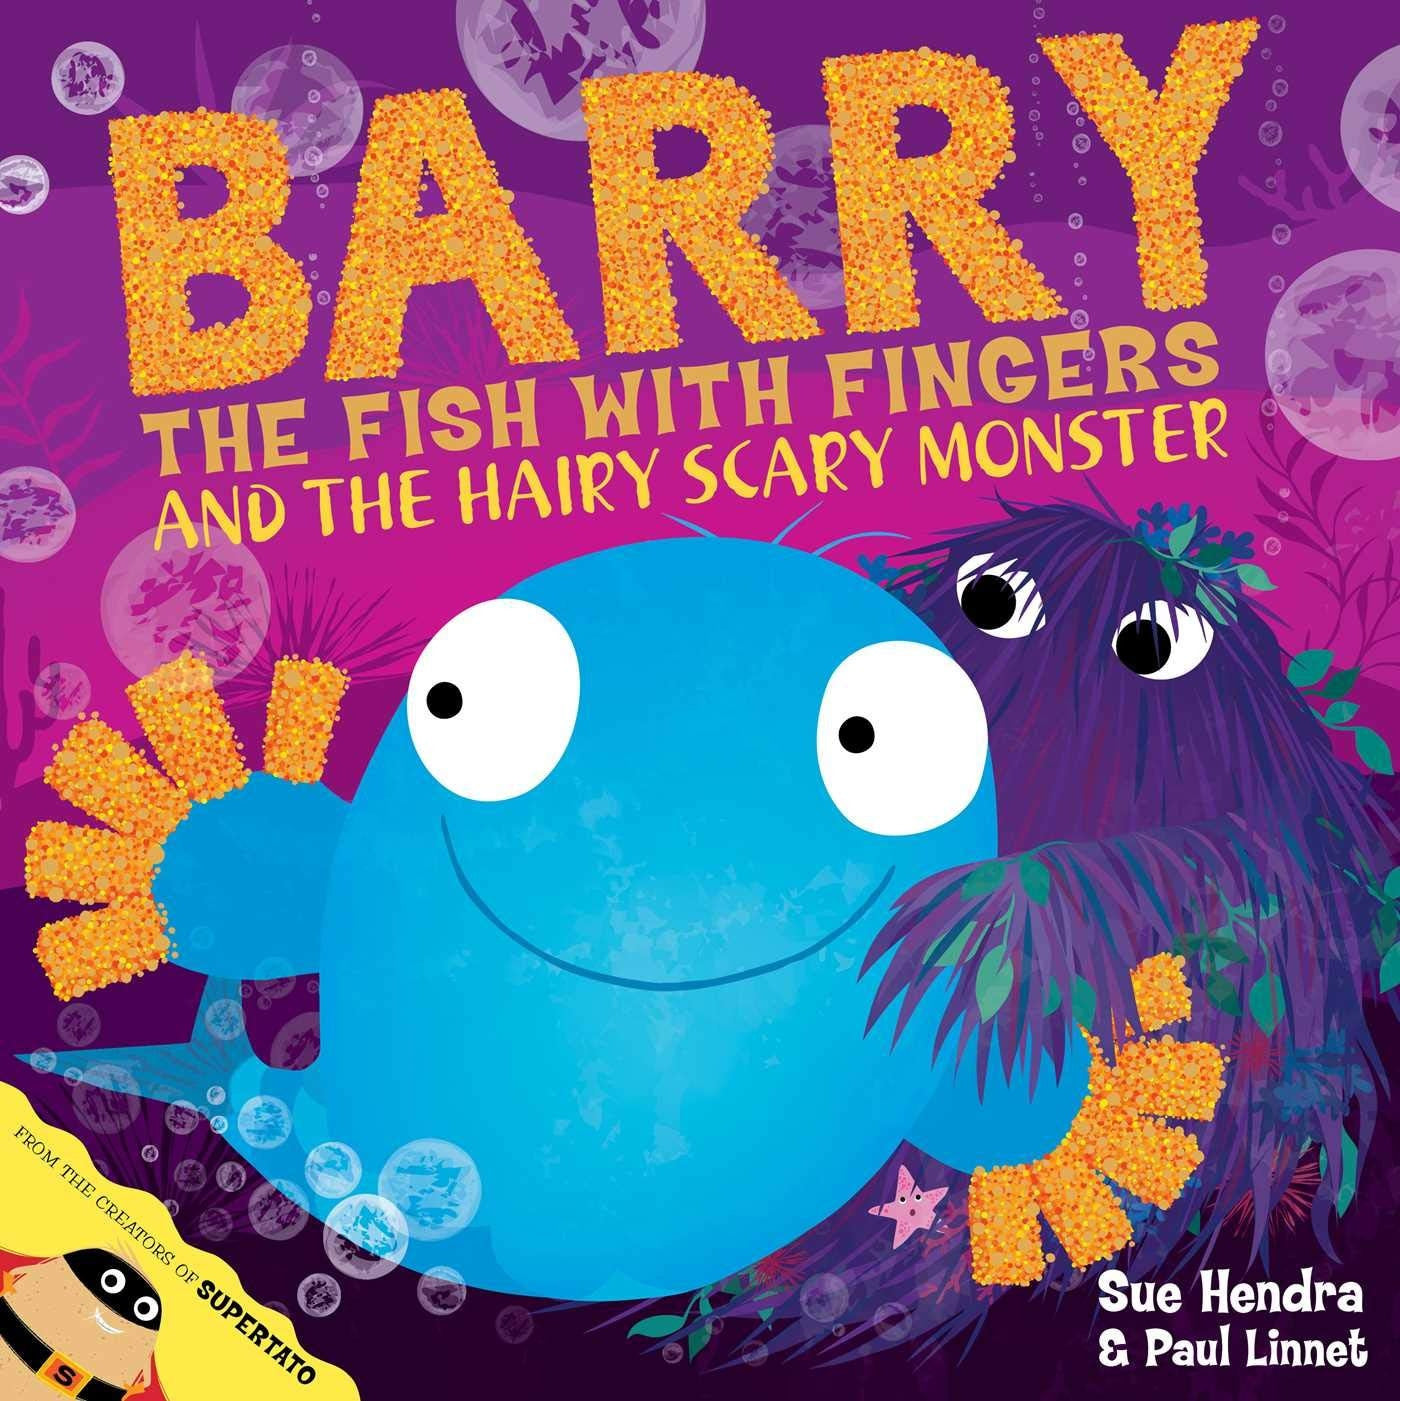 Barry the Fish with Fingers and the Hairy Scary Monster - Sue Hendra & Paul Linnet